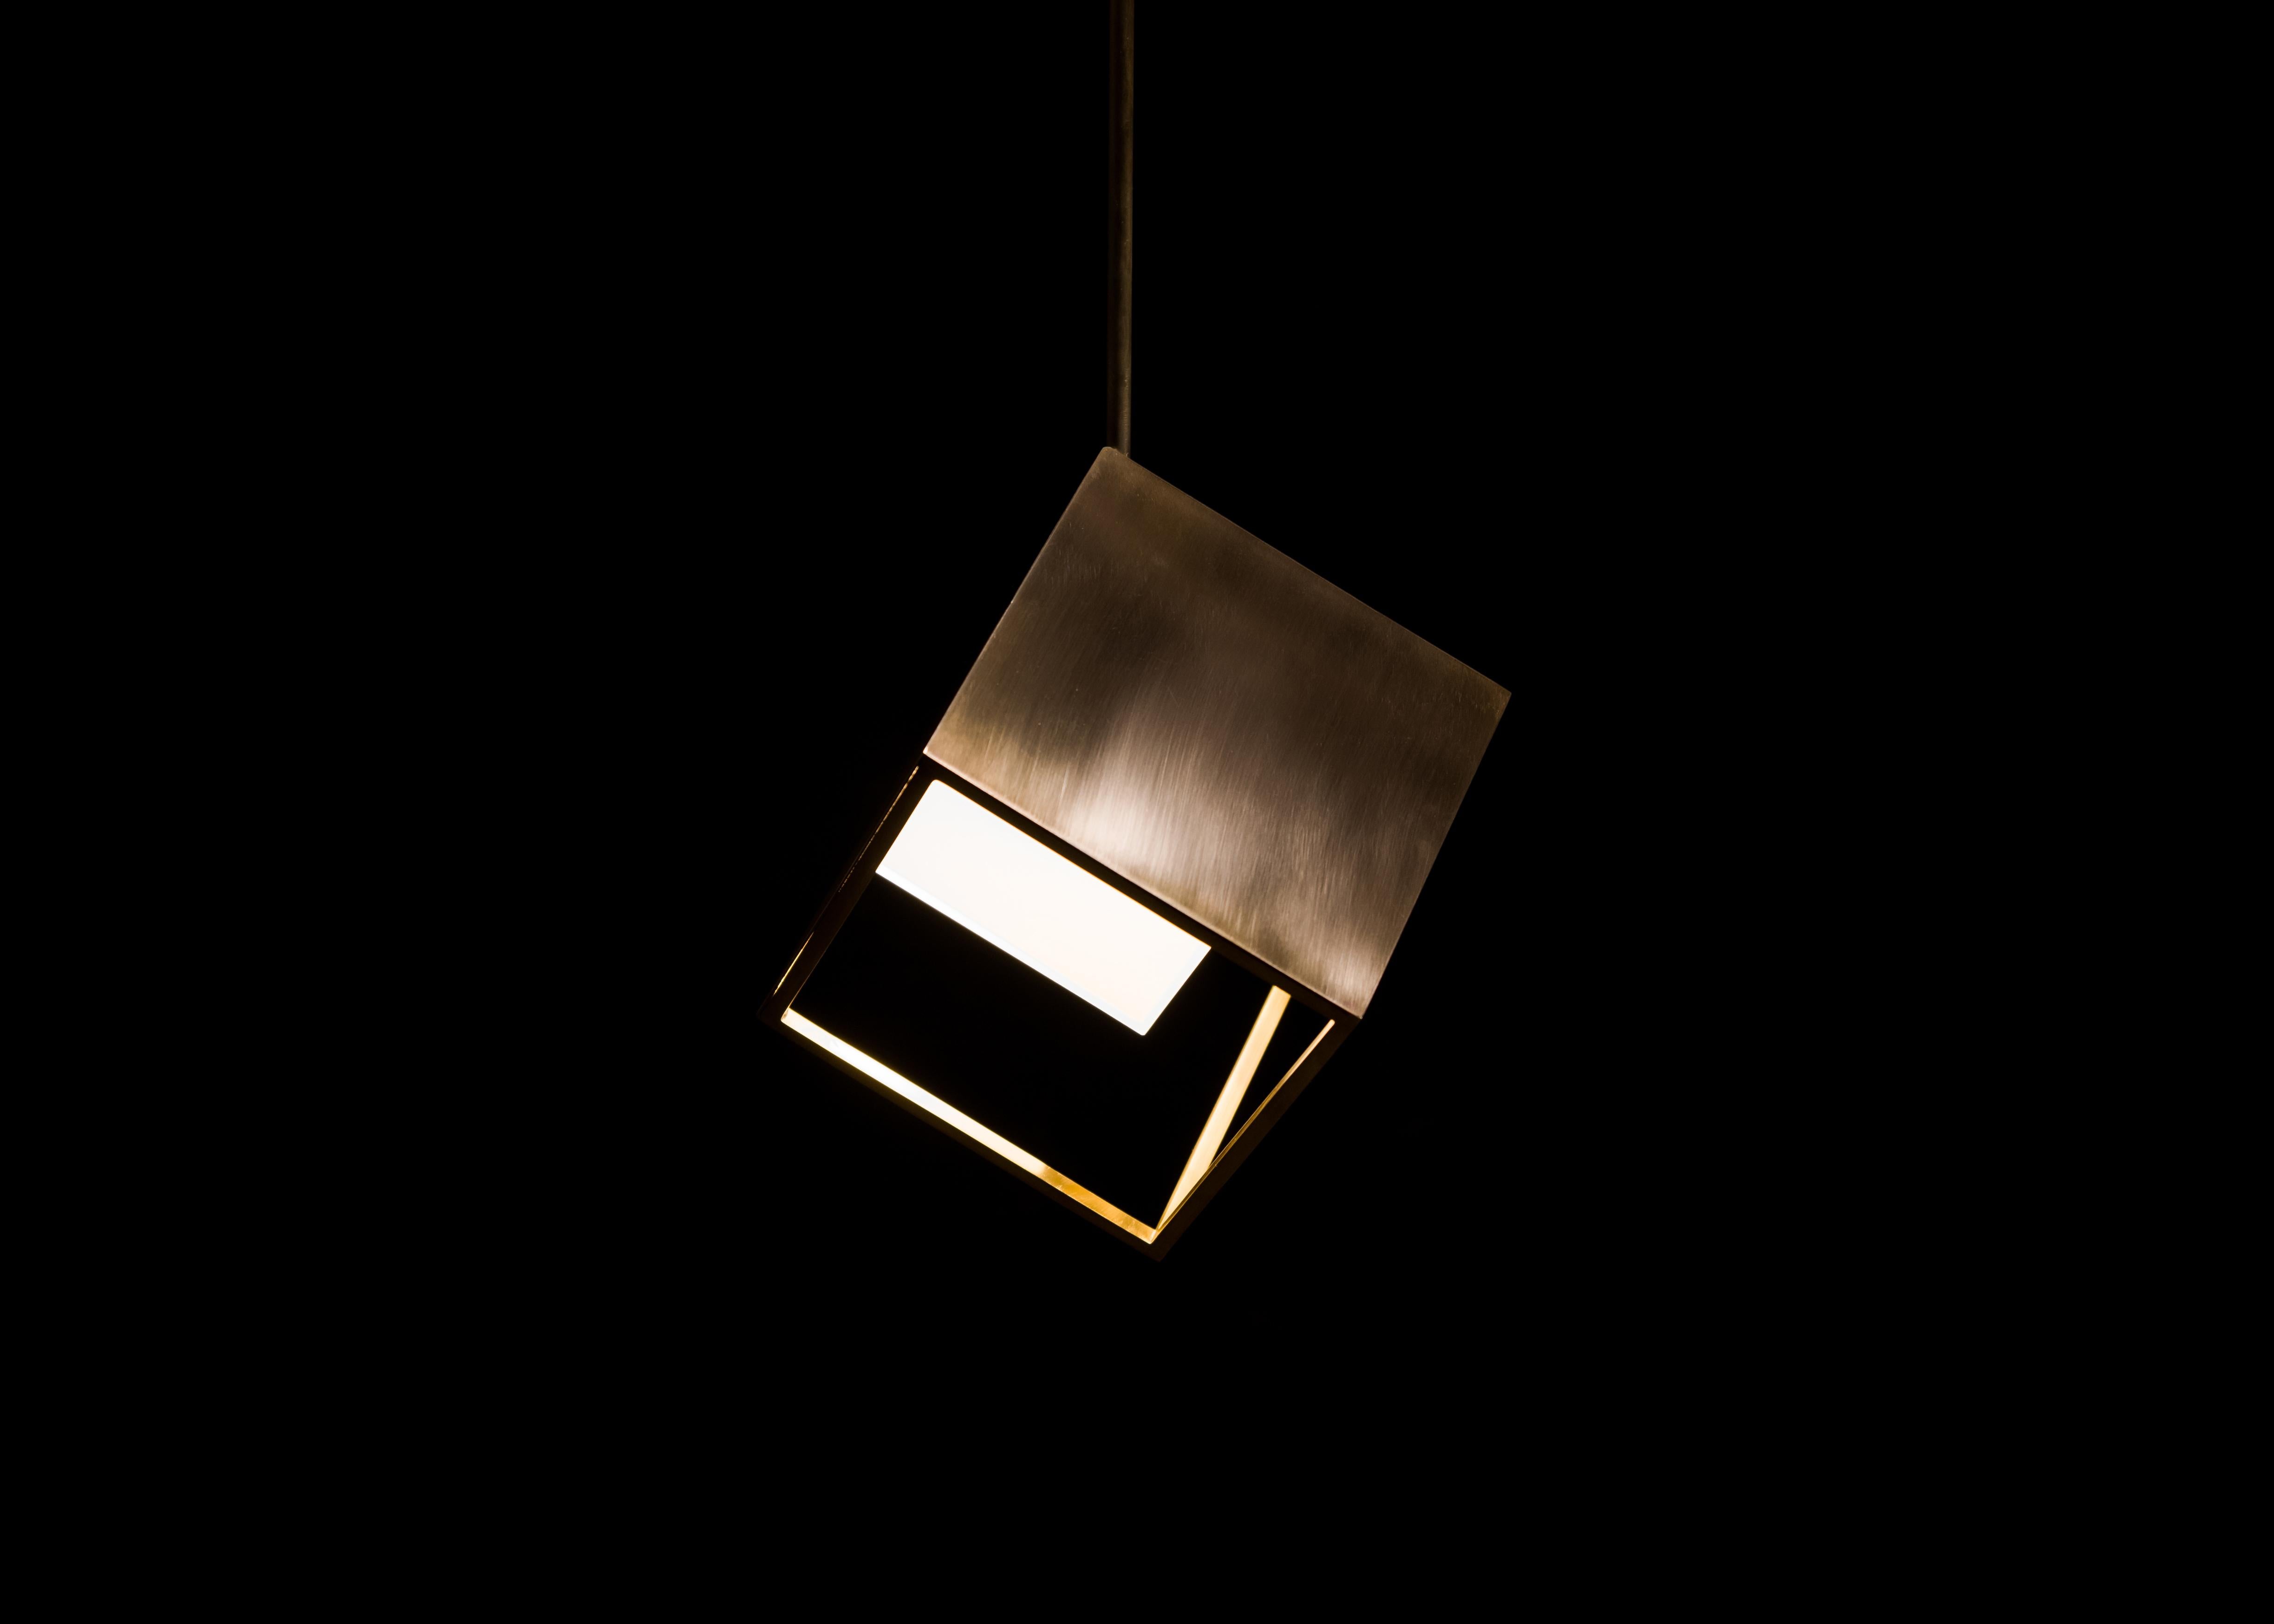 UNIS is the unit cell of the ISOS collection, a pendant light inspired by the simplest and most common shape found in crystals and minerals, the cube. The geometry of the brass pendant is characterised by a thin frame, and it is partially enclosed